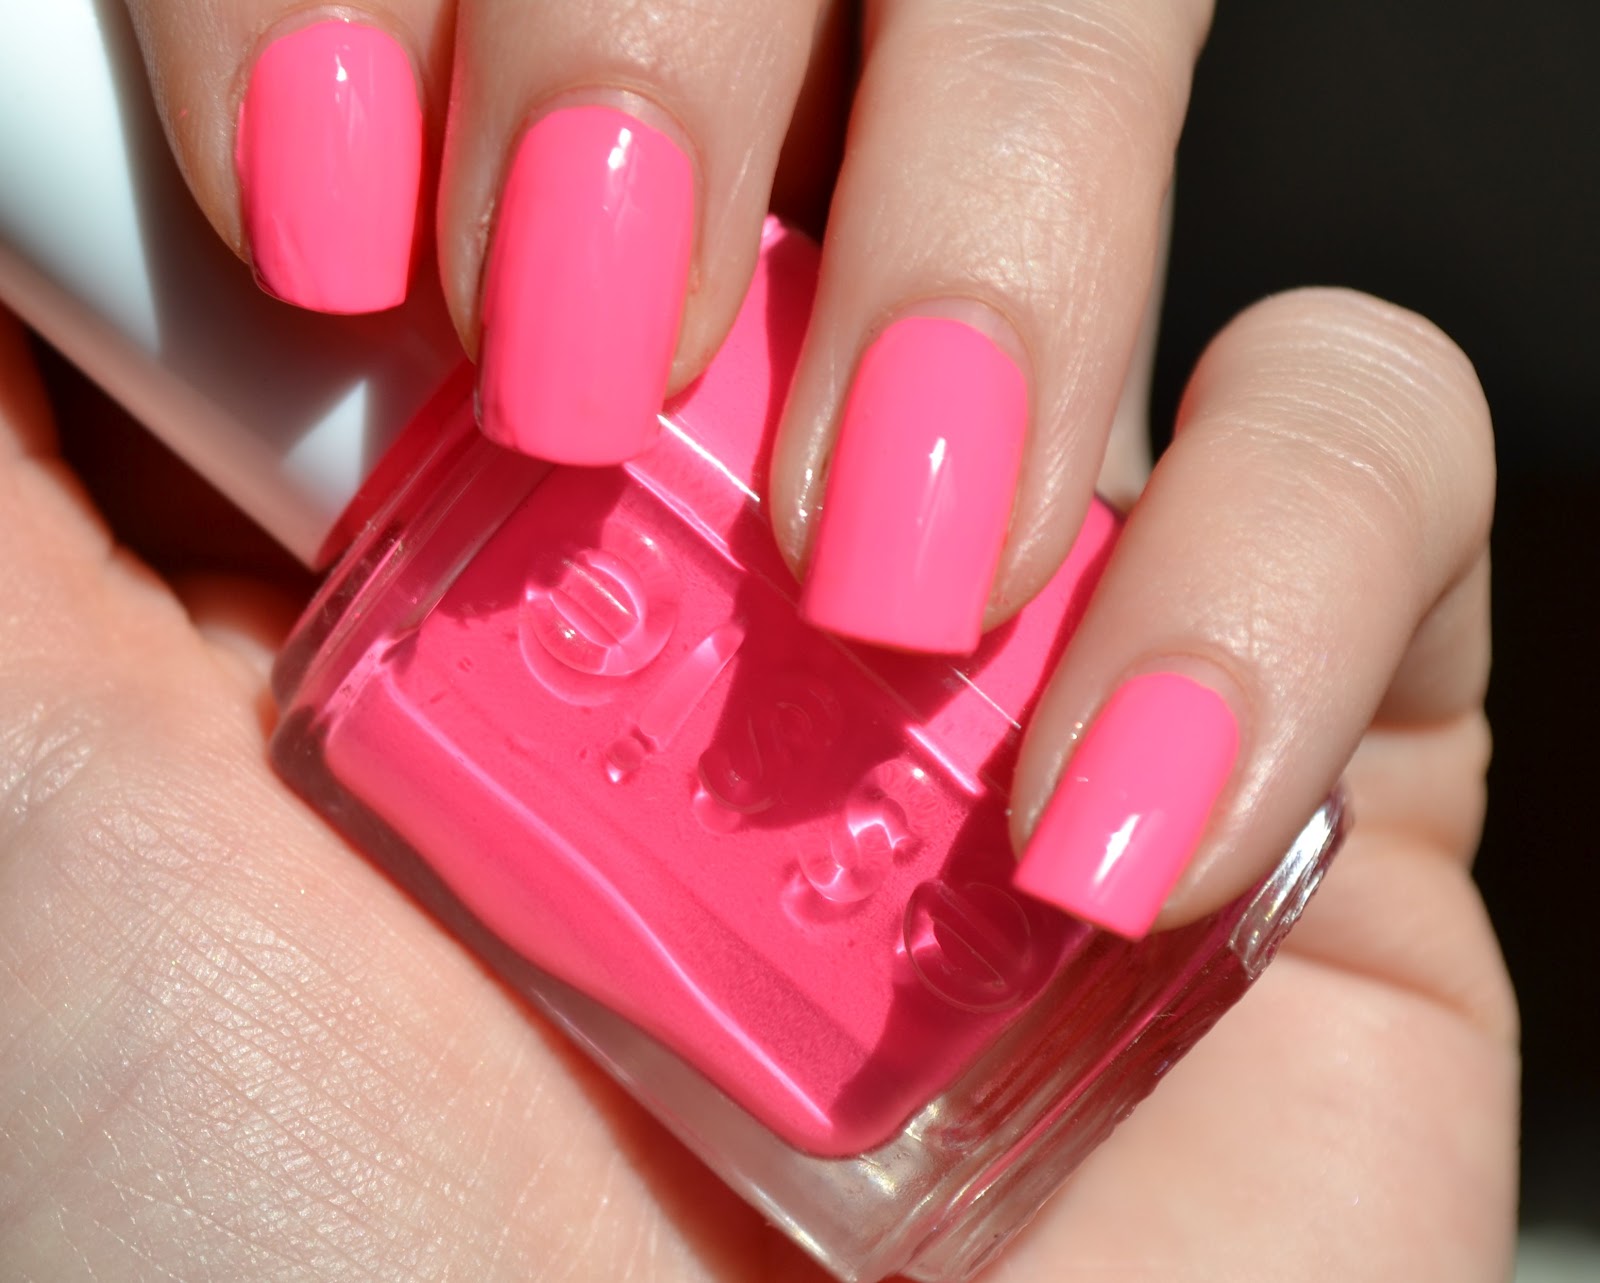 MakeUpVitamins: Essie Punchy Pink 694 Swatch, Review & Dupes